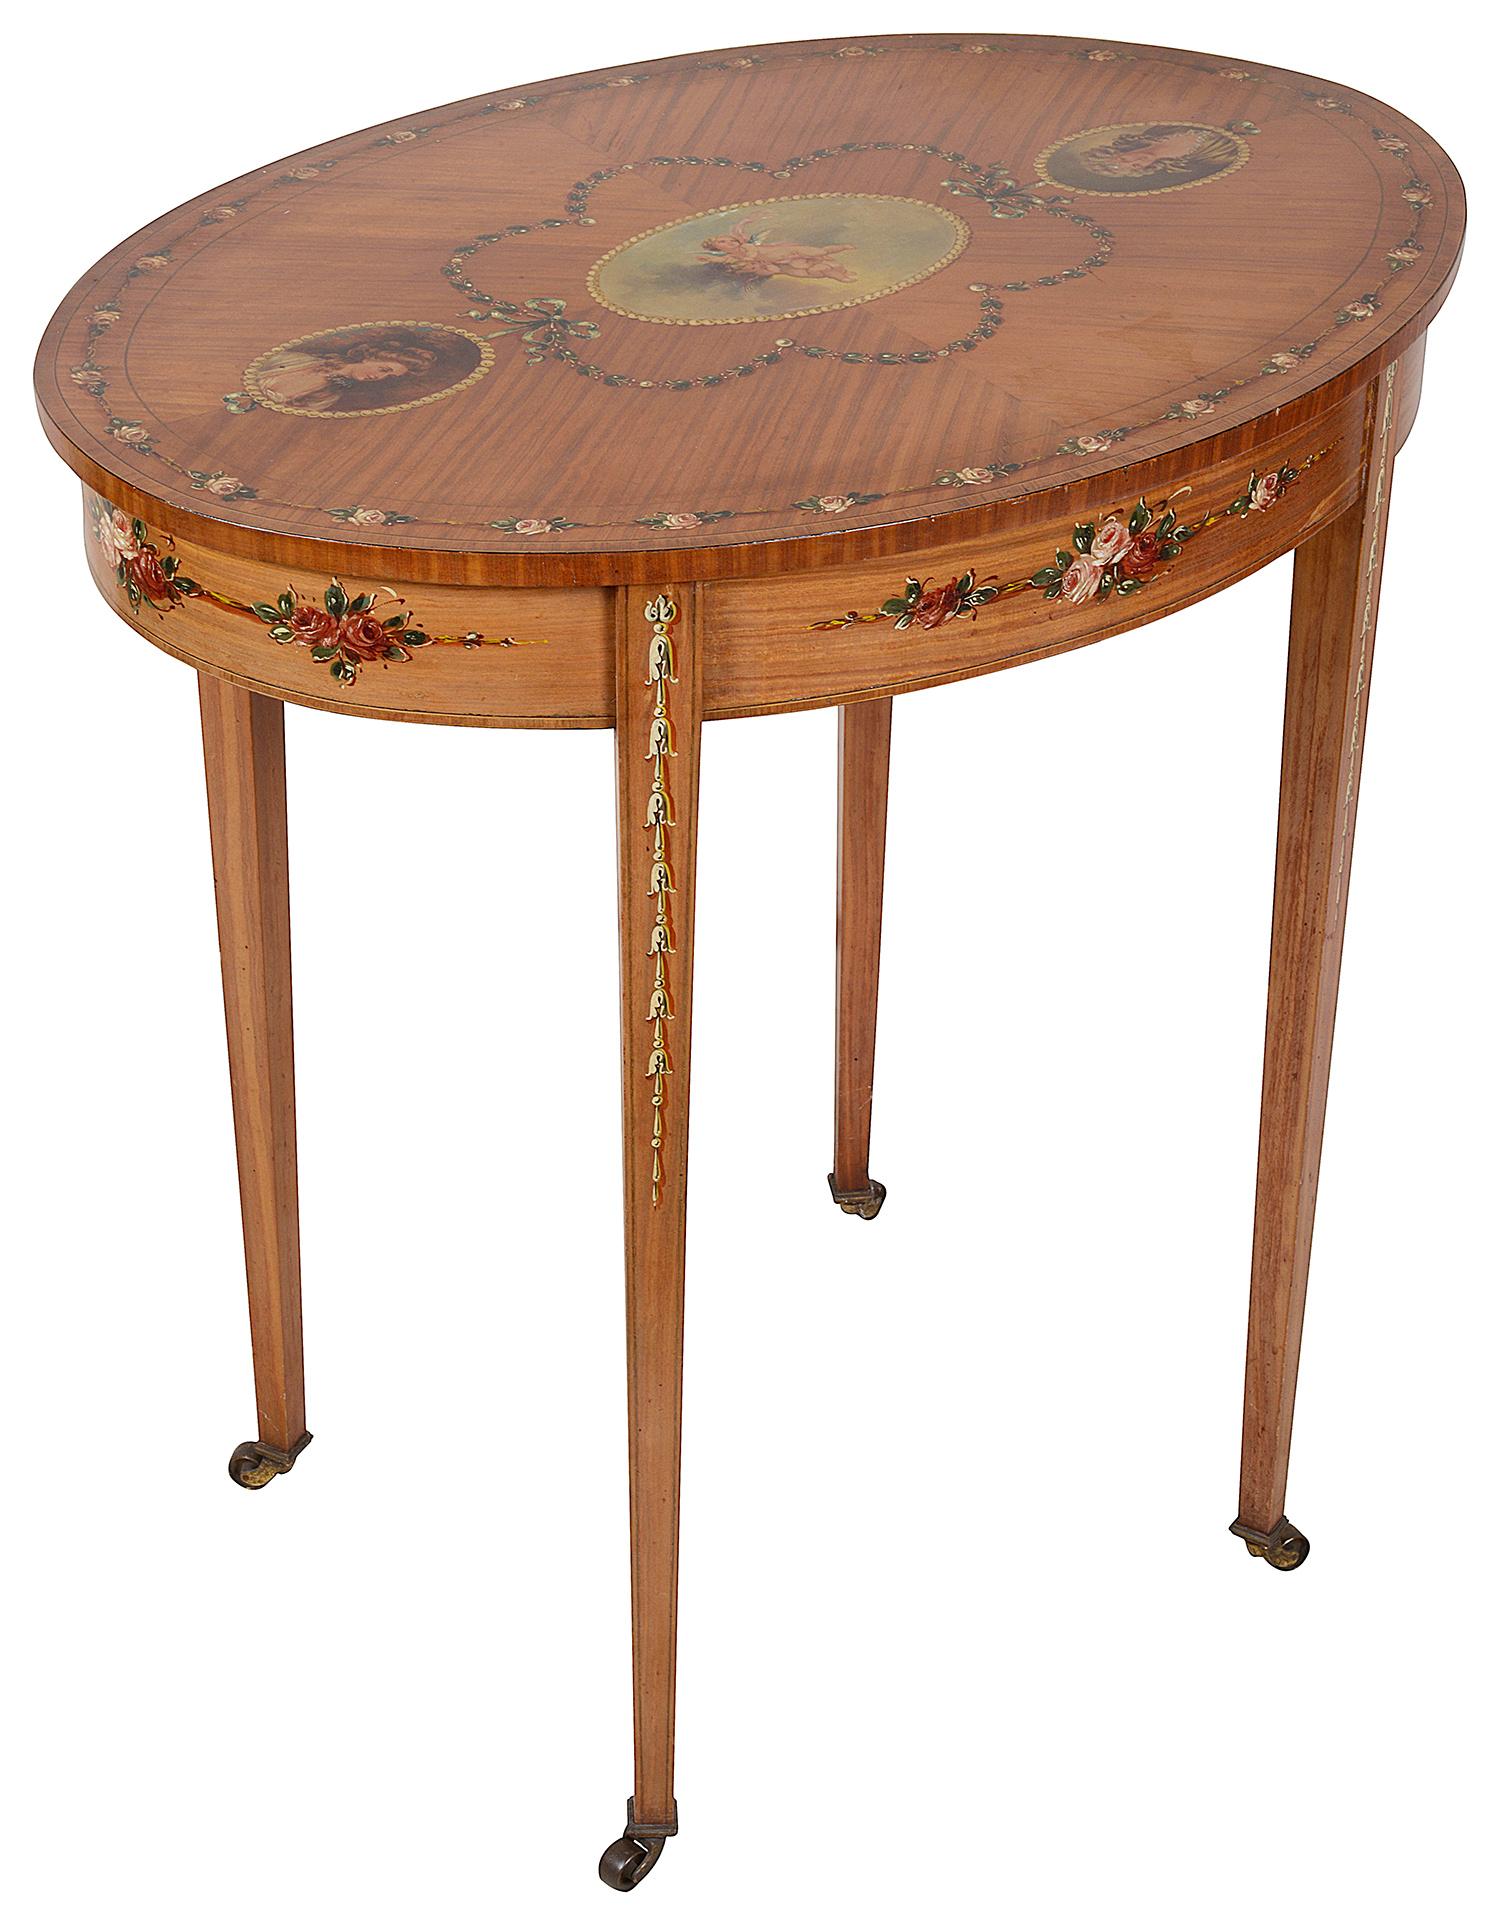 A good quality late 19th century satinwood, Sheraton Revival side table, having hand painted floral swag decoration to the top and frieze, oval panels depicting cherubs and classical ladies. Raised on square tapering legs, terminating in brass